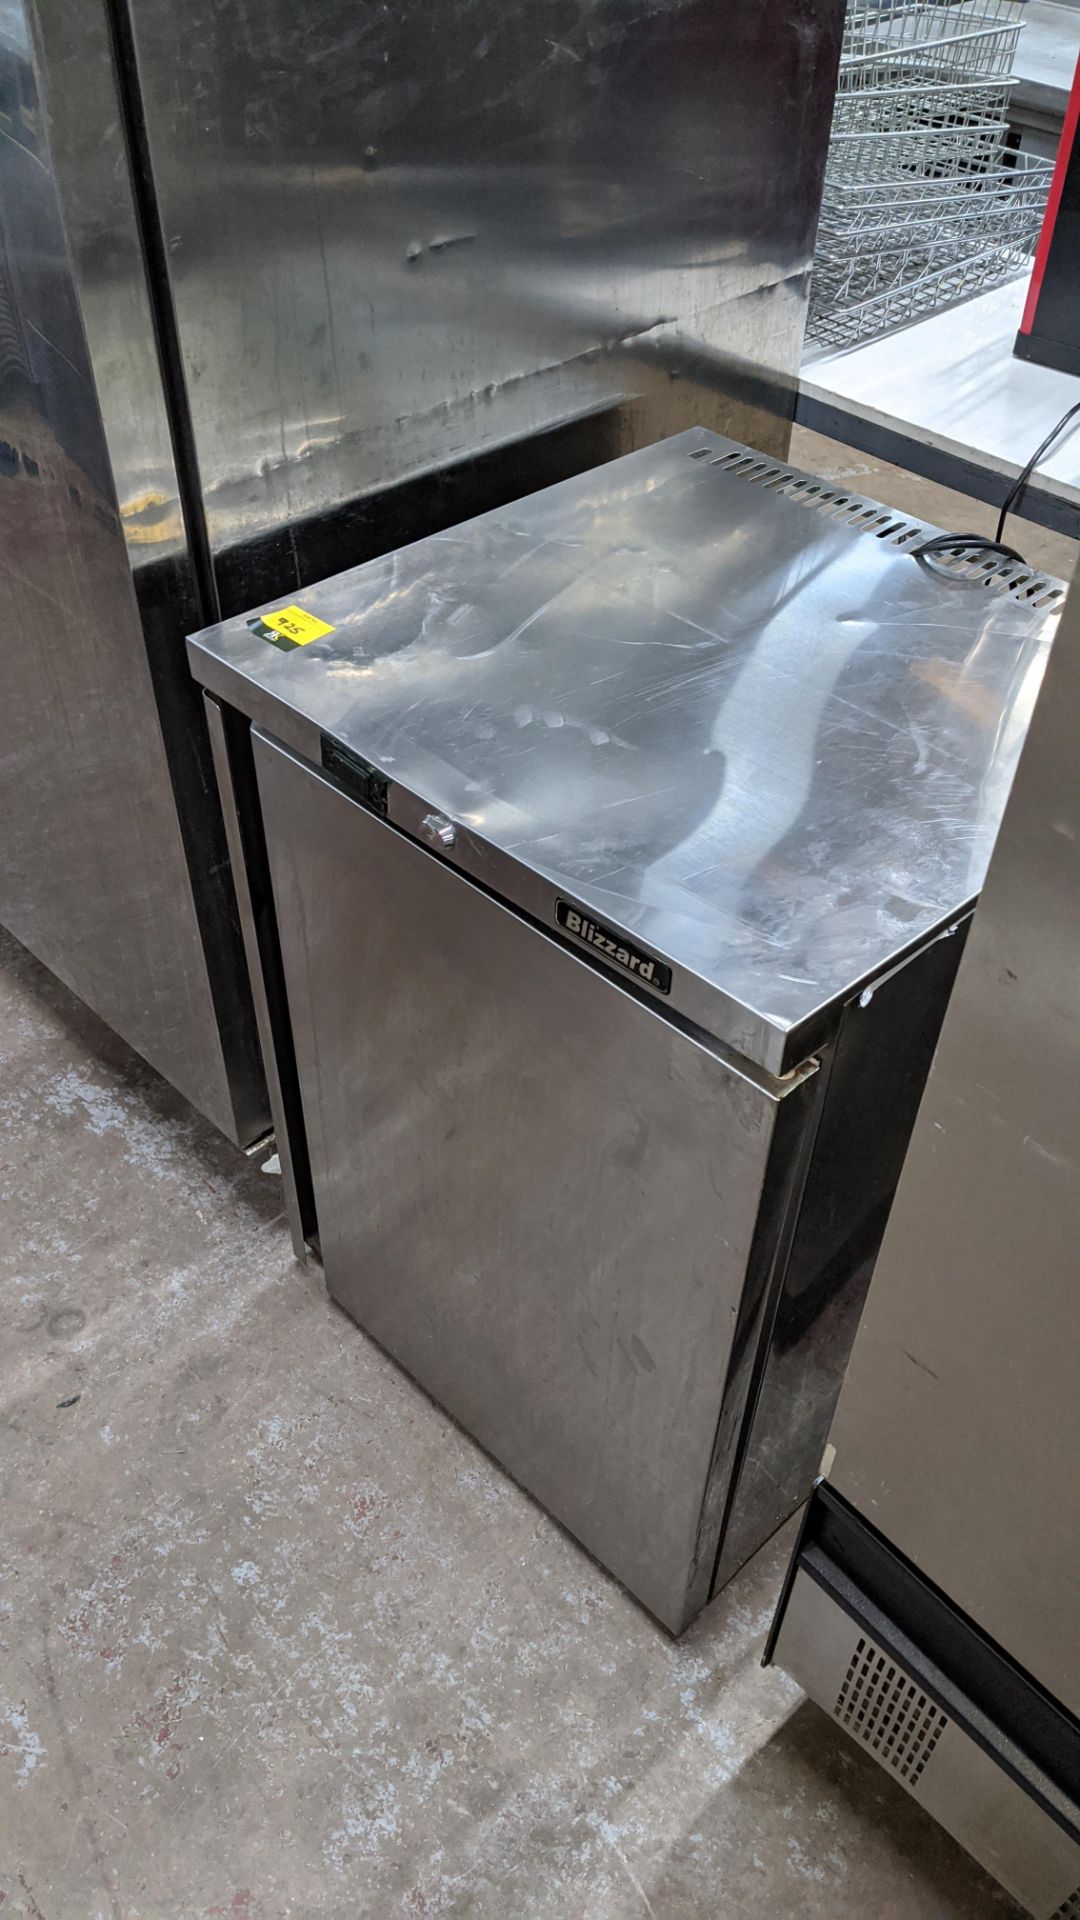 Blizzard stainless steel under counter freezer. IMPORTANT: Please remember goods successfully bid